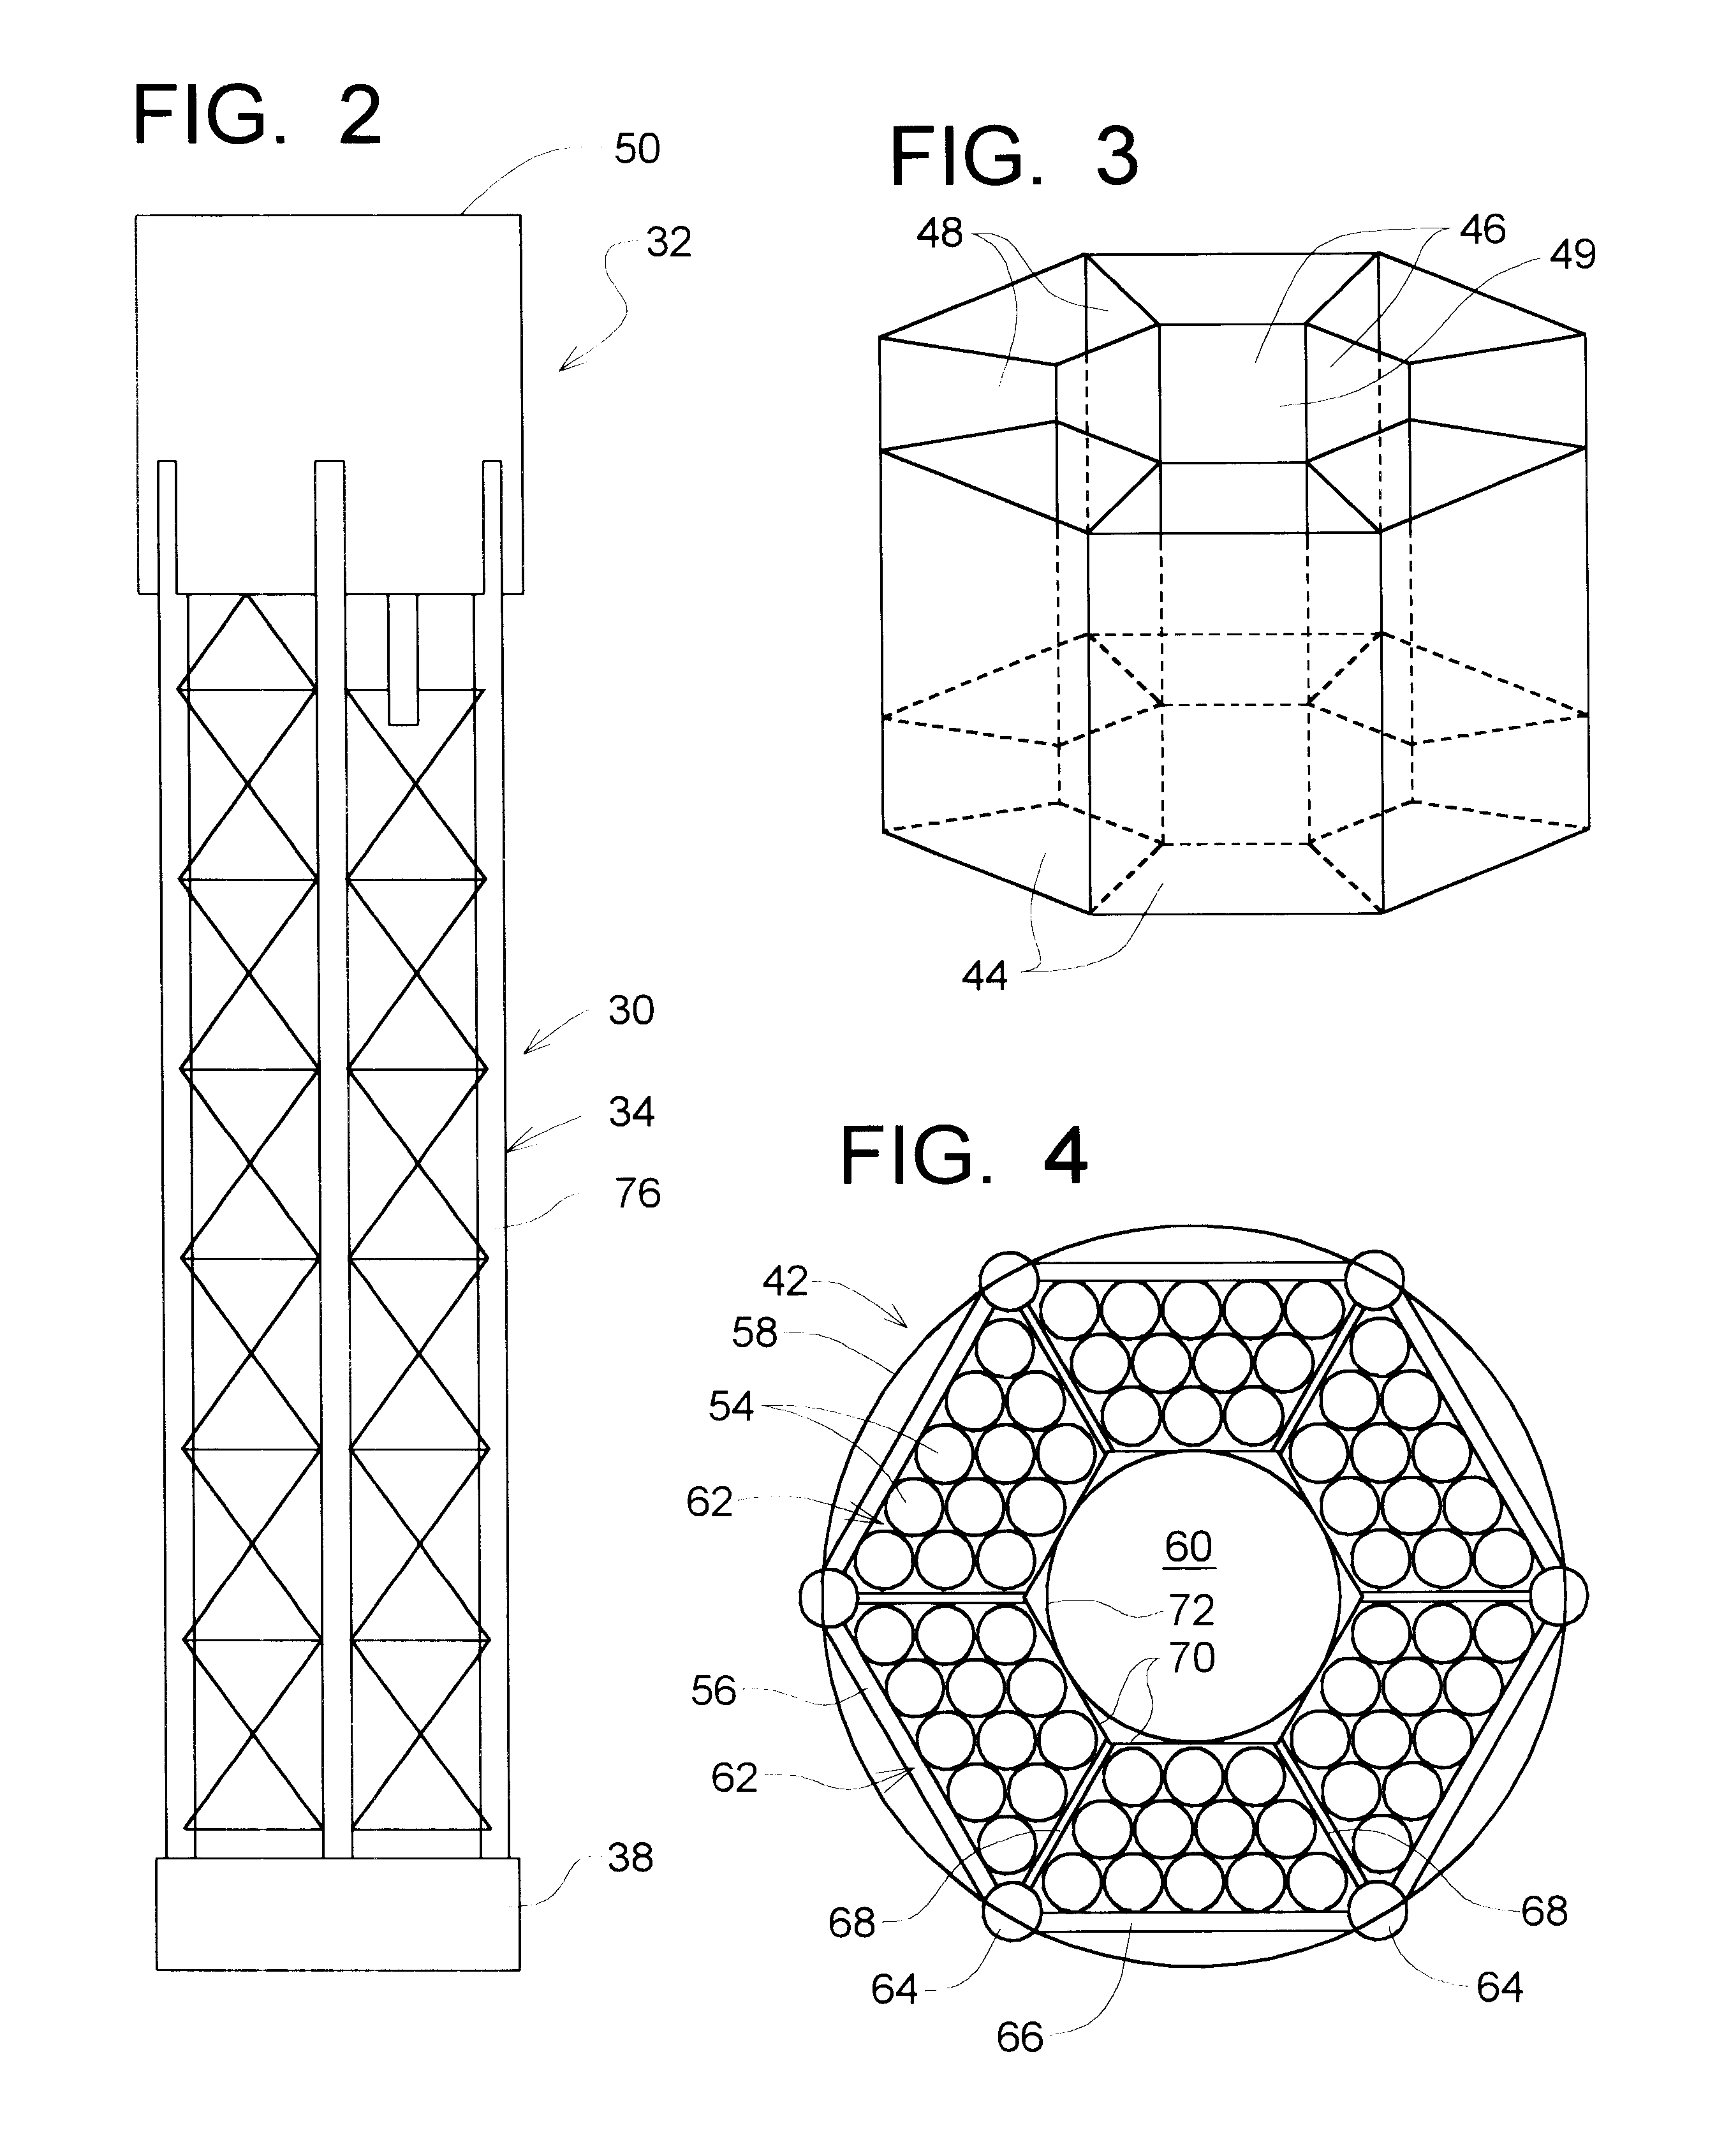 Flotation system and method for off-shore platform and the like